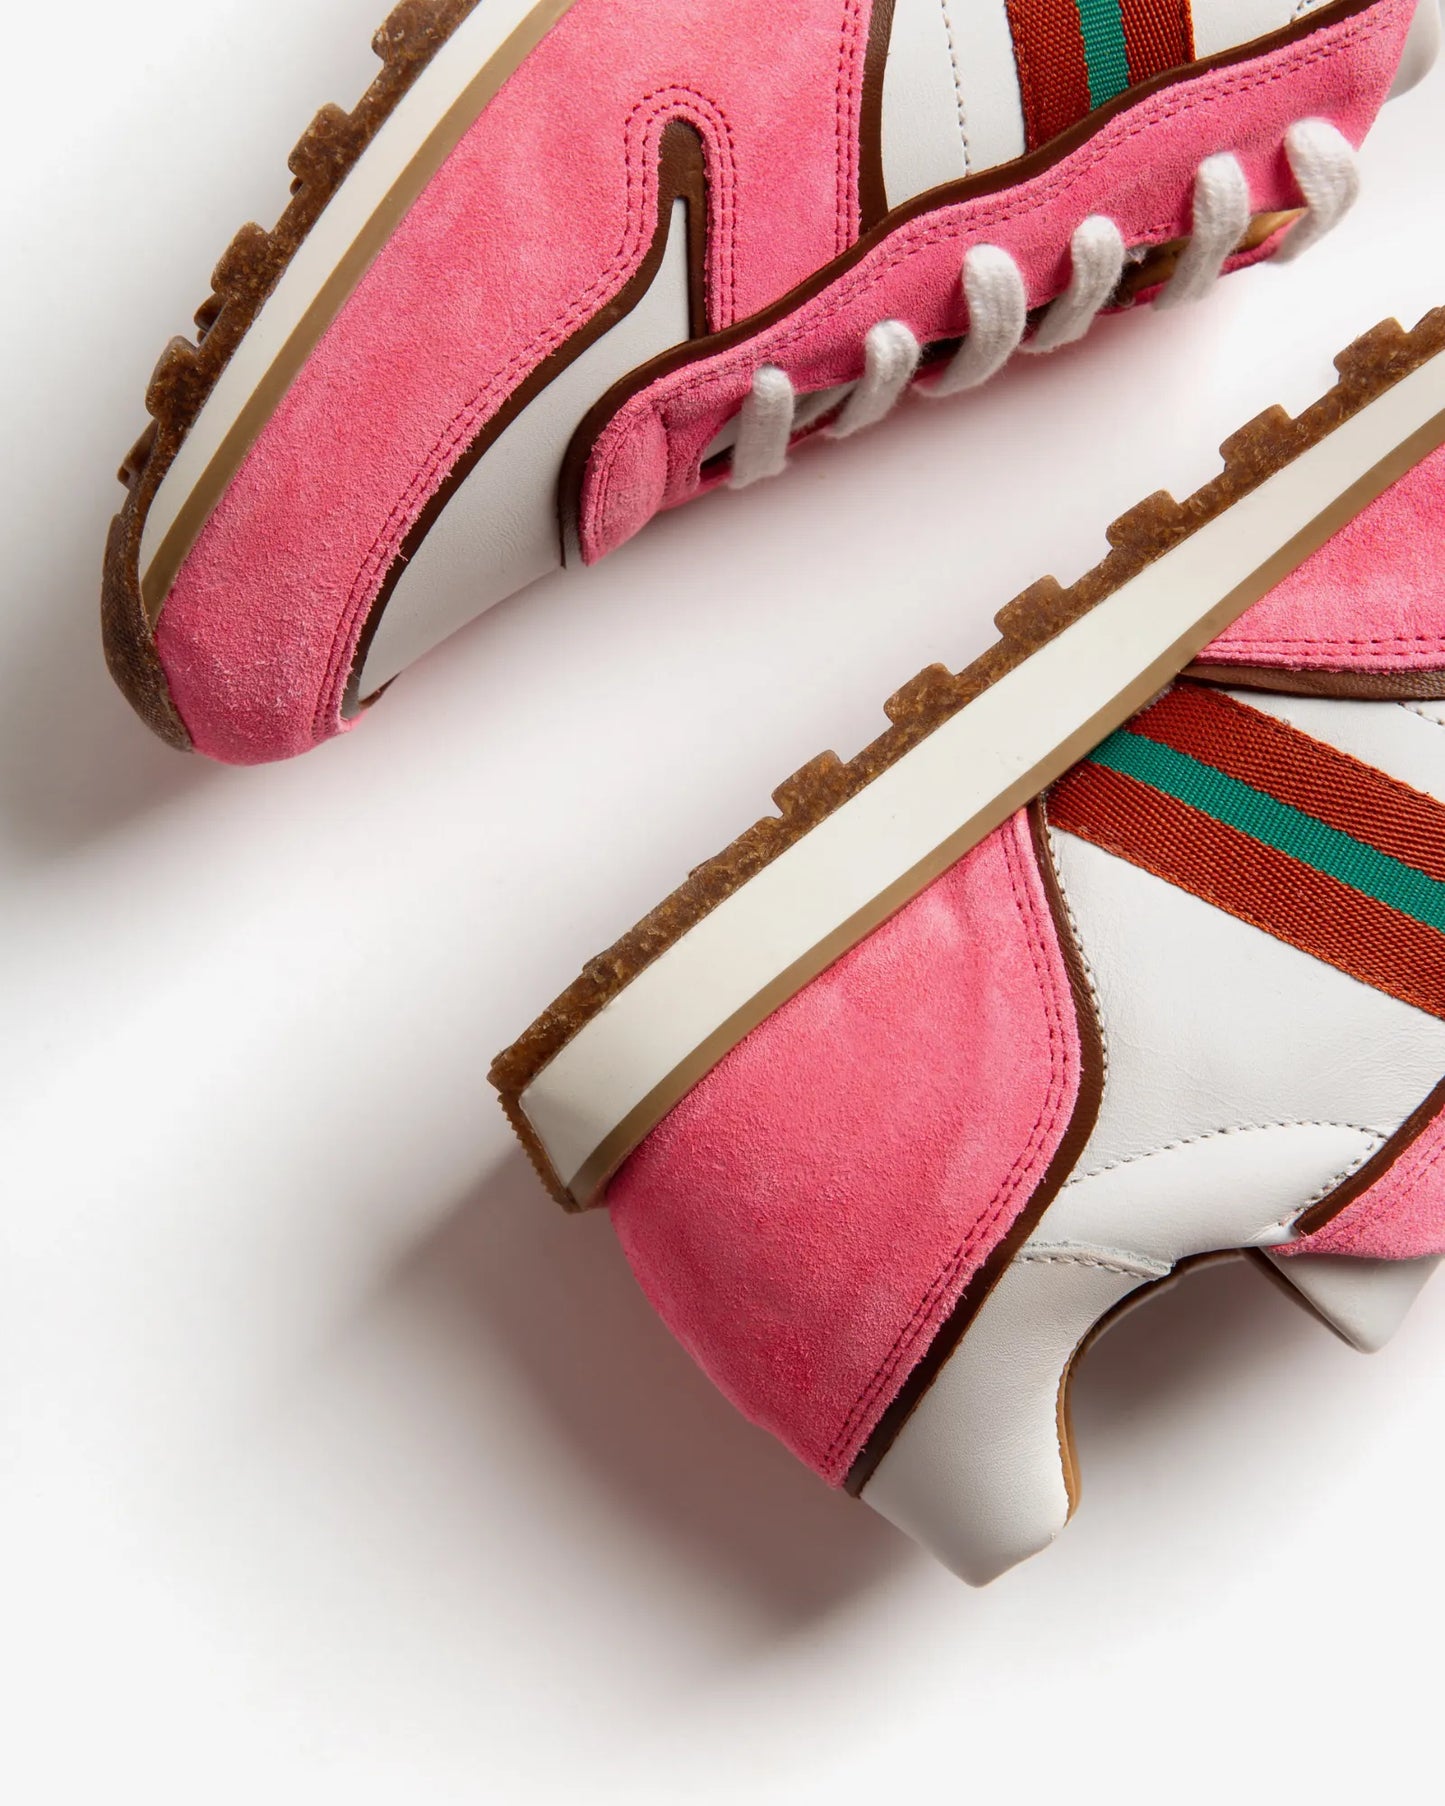 Studio Neon Suede Leather Trainers - Pink